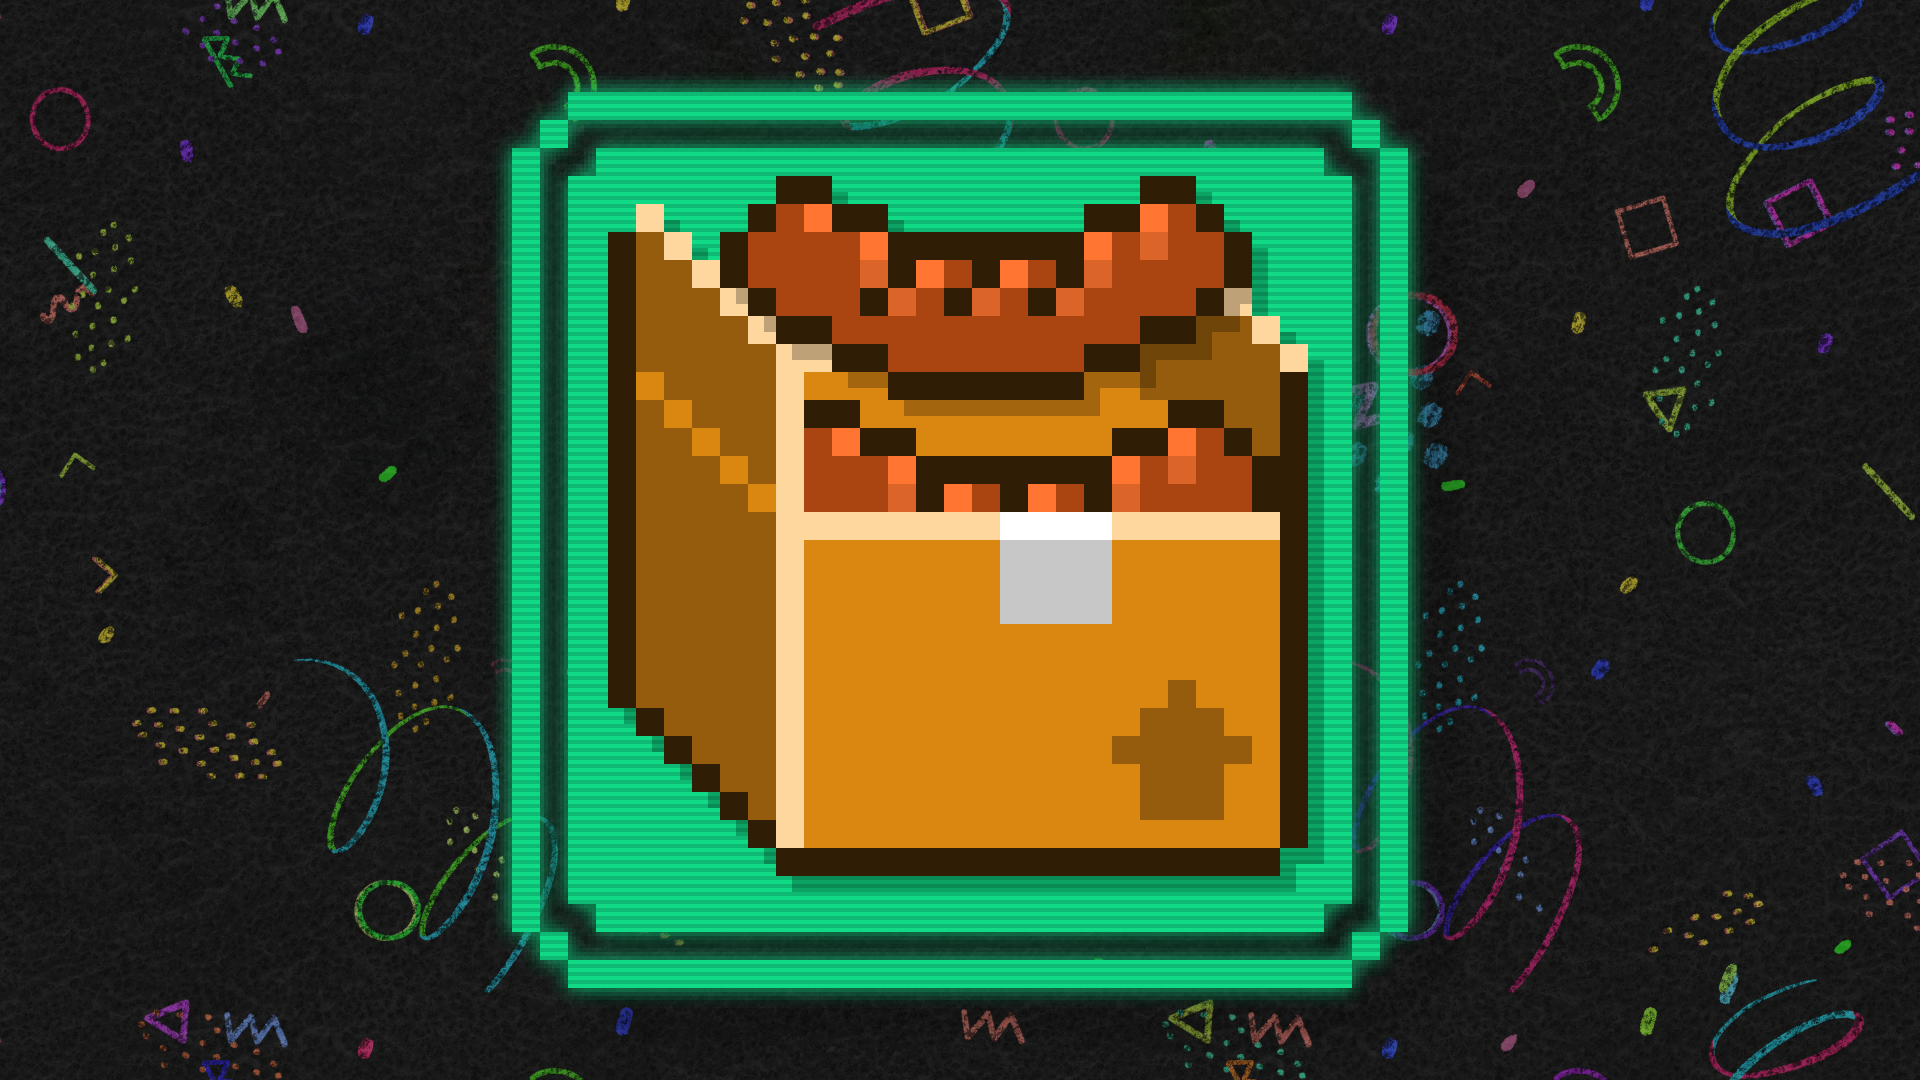 Icon for Waking Nightmare